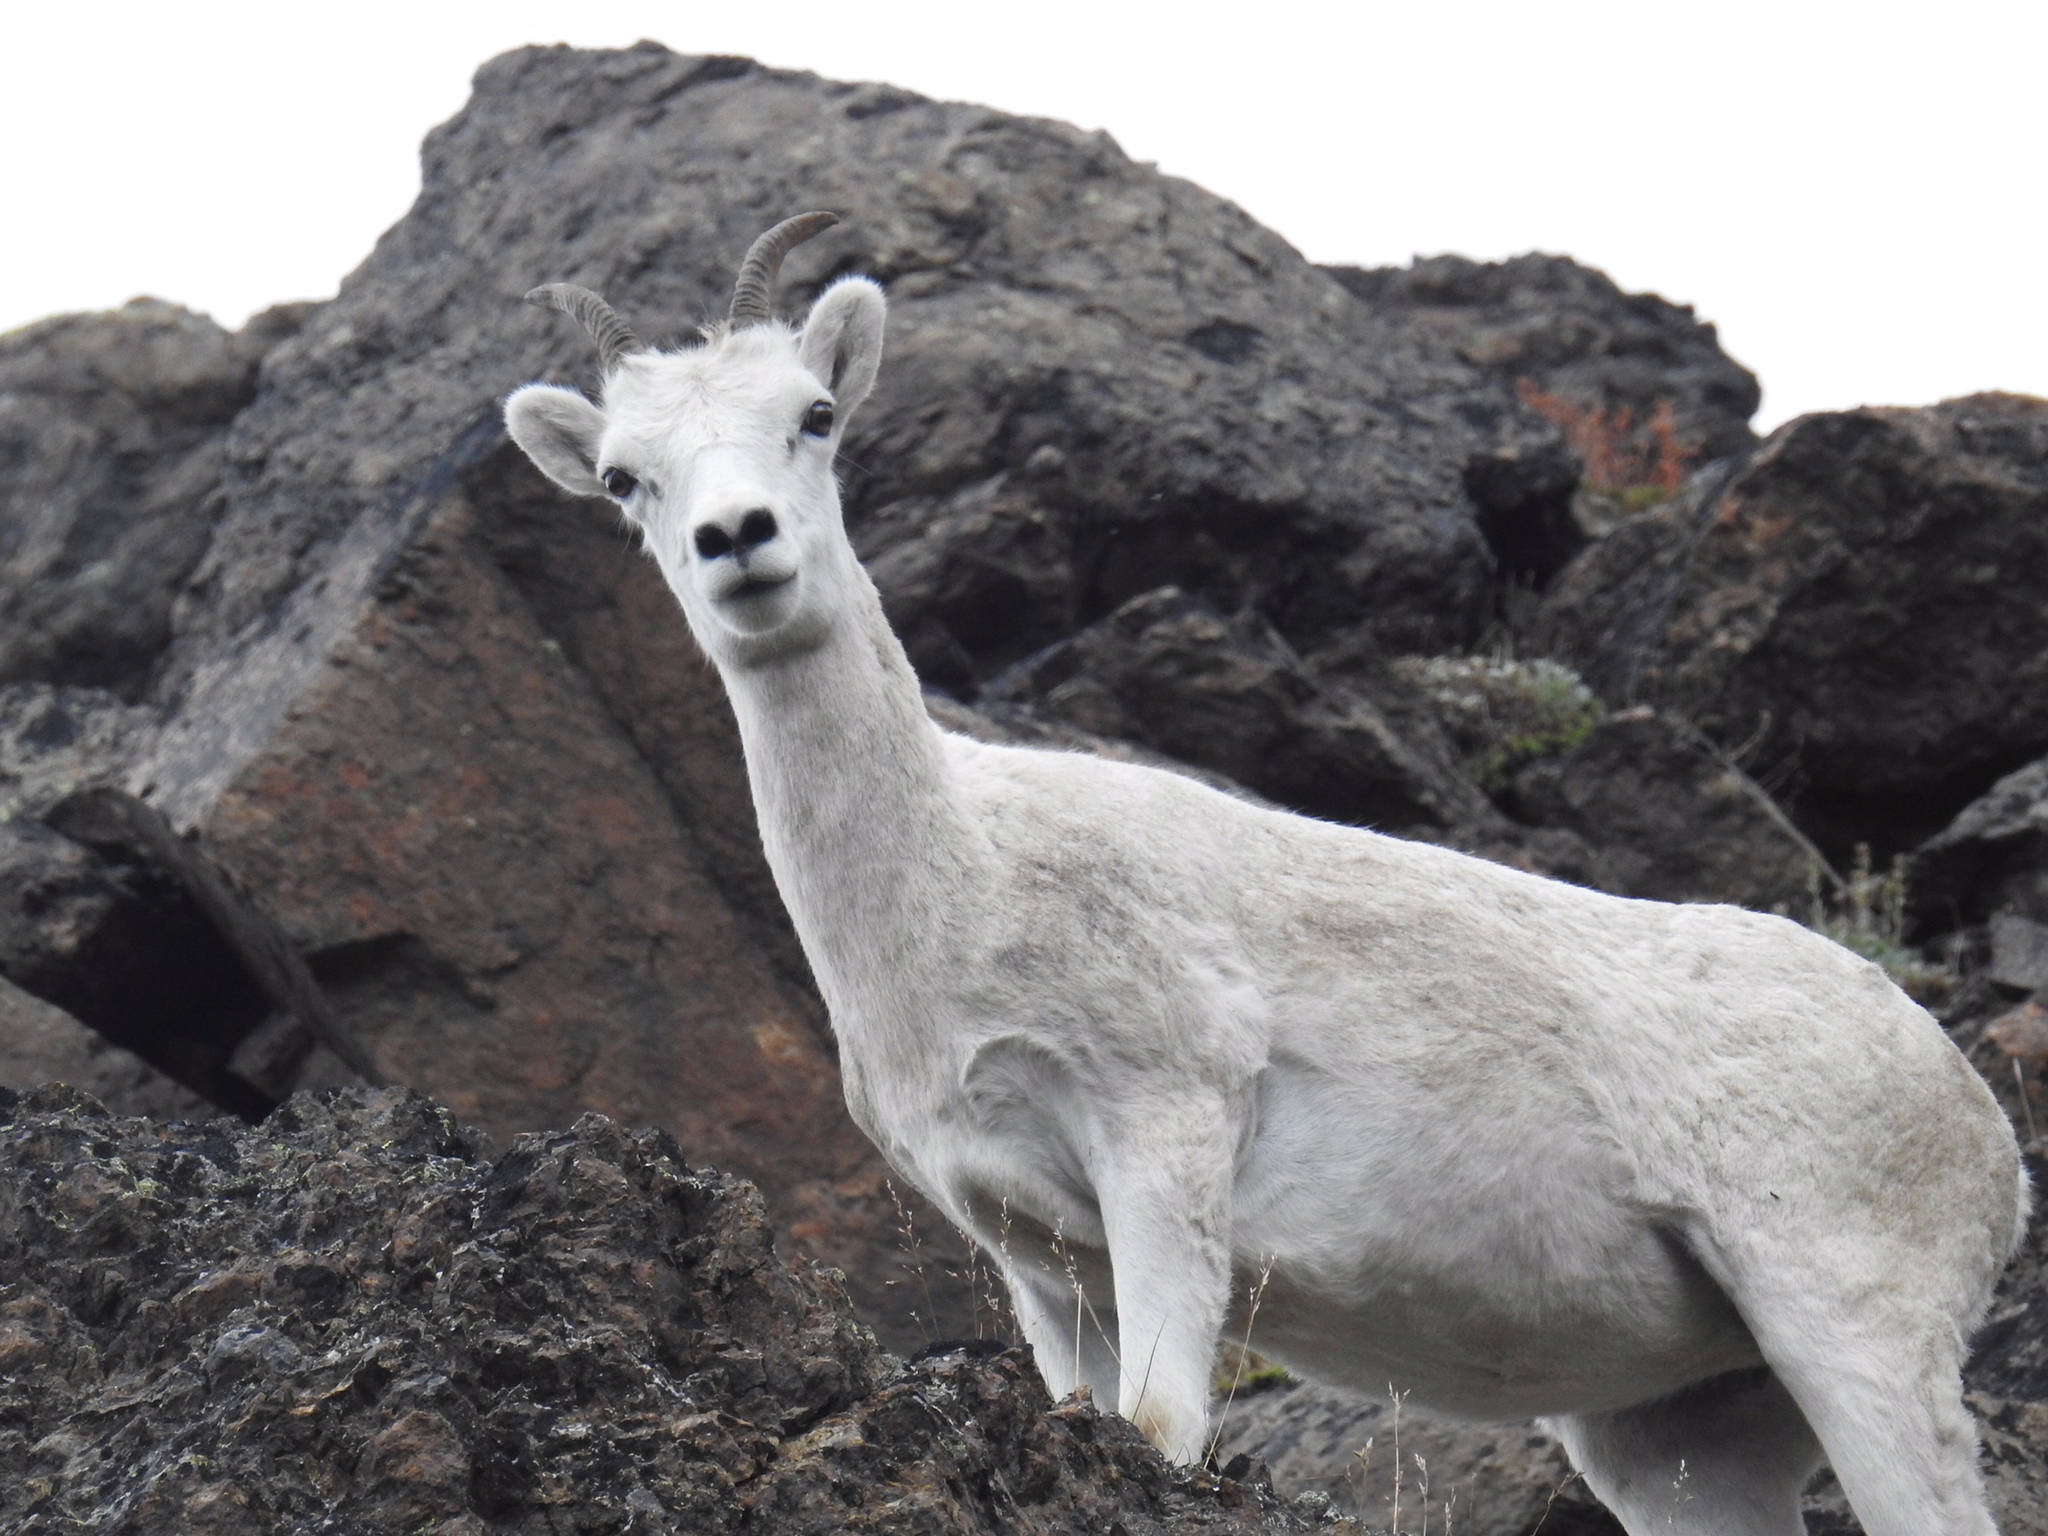 About half as many Dall Sheep live in the Chugach Mountains today than in the 1990s, according to Alaska Department of Fish and Game research. (Photo courtesy of Luke Metherell | Alaska Department of Fish and Game)